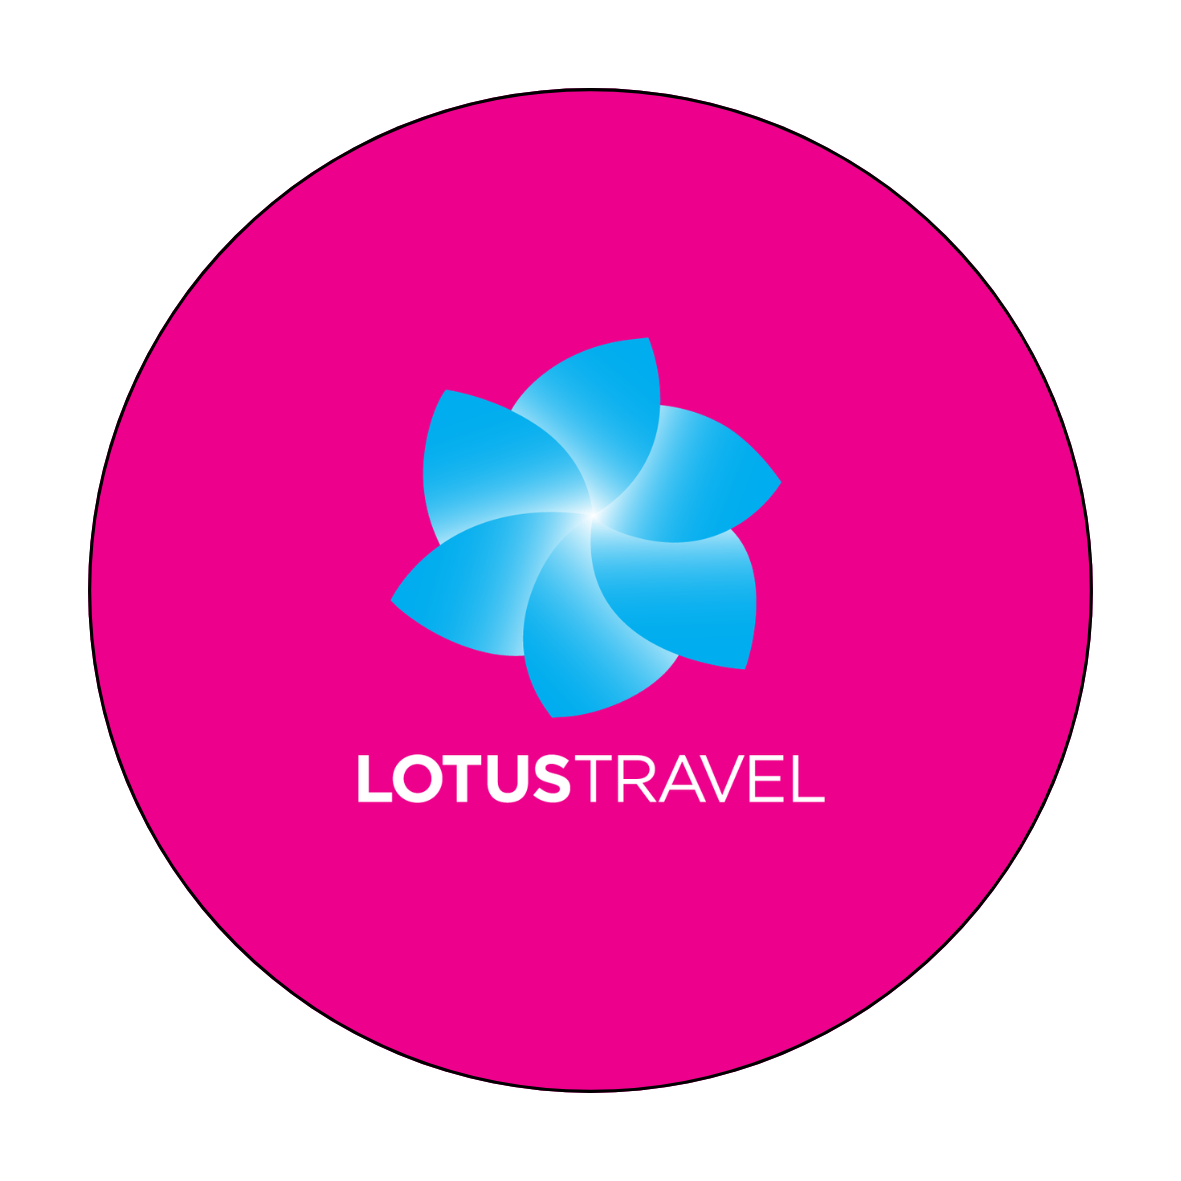 Lotus travel client of Playerence Logo